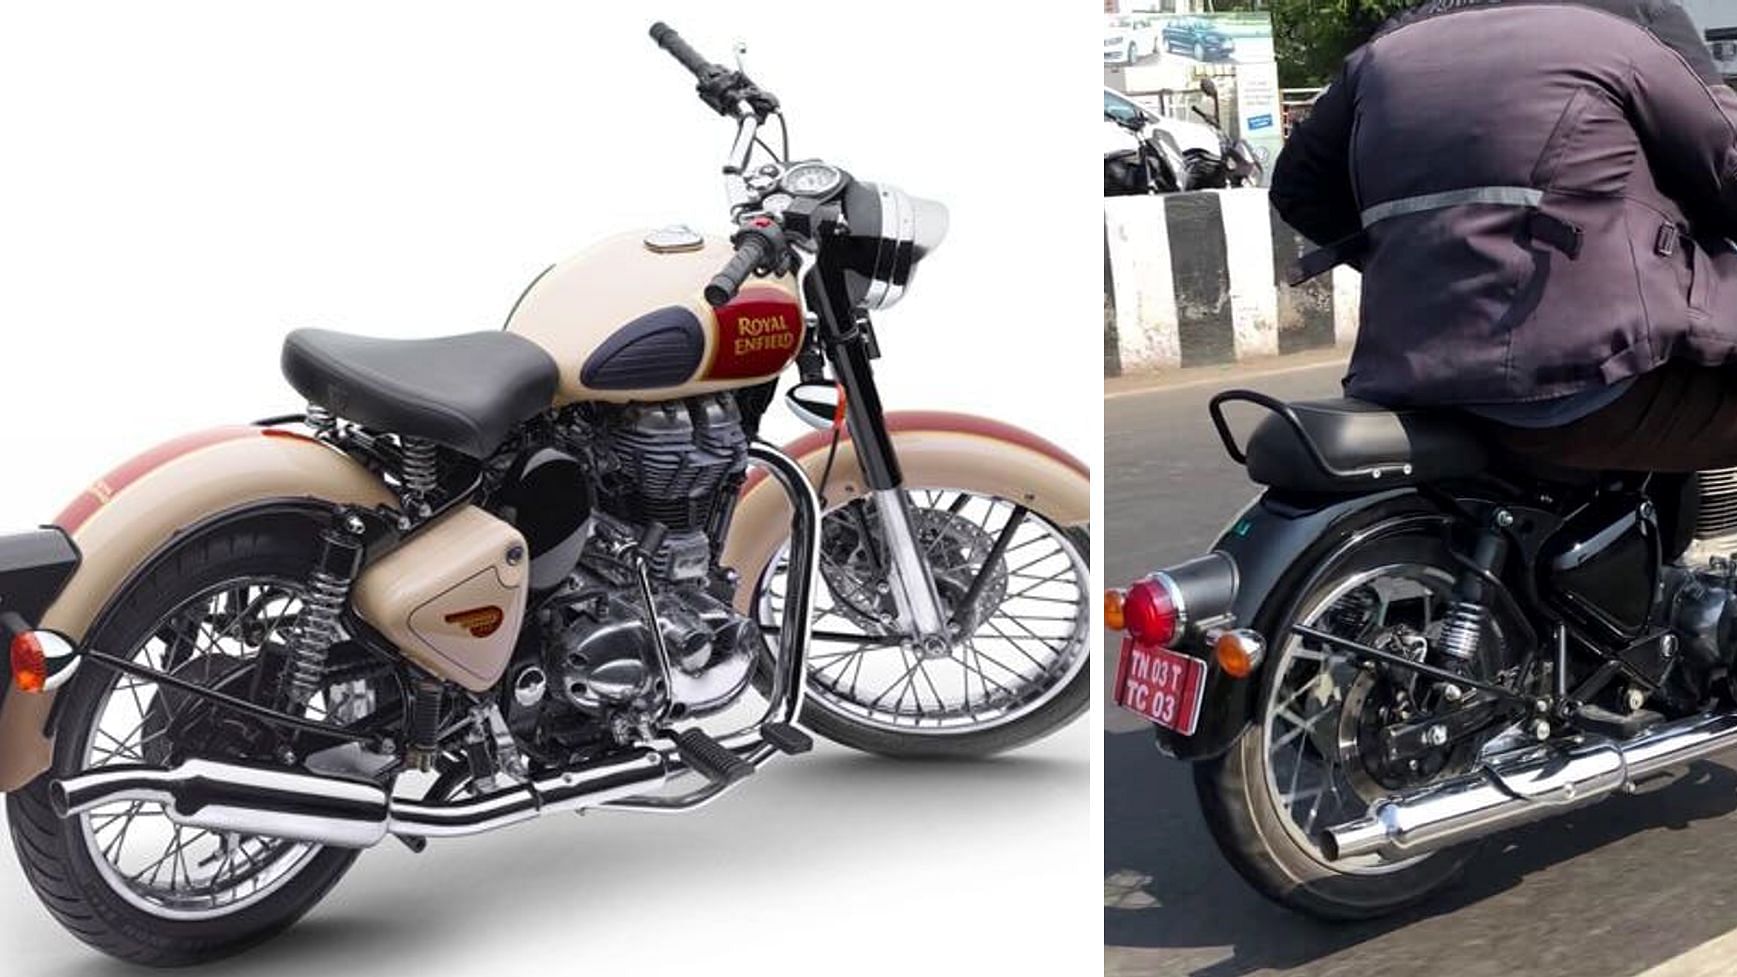 A Royal Enfield Classic with significant changes has been spotted testing in Chennai.